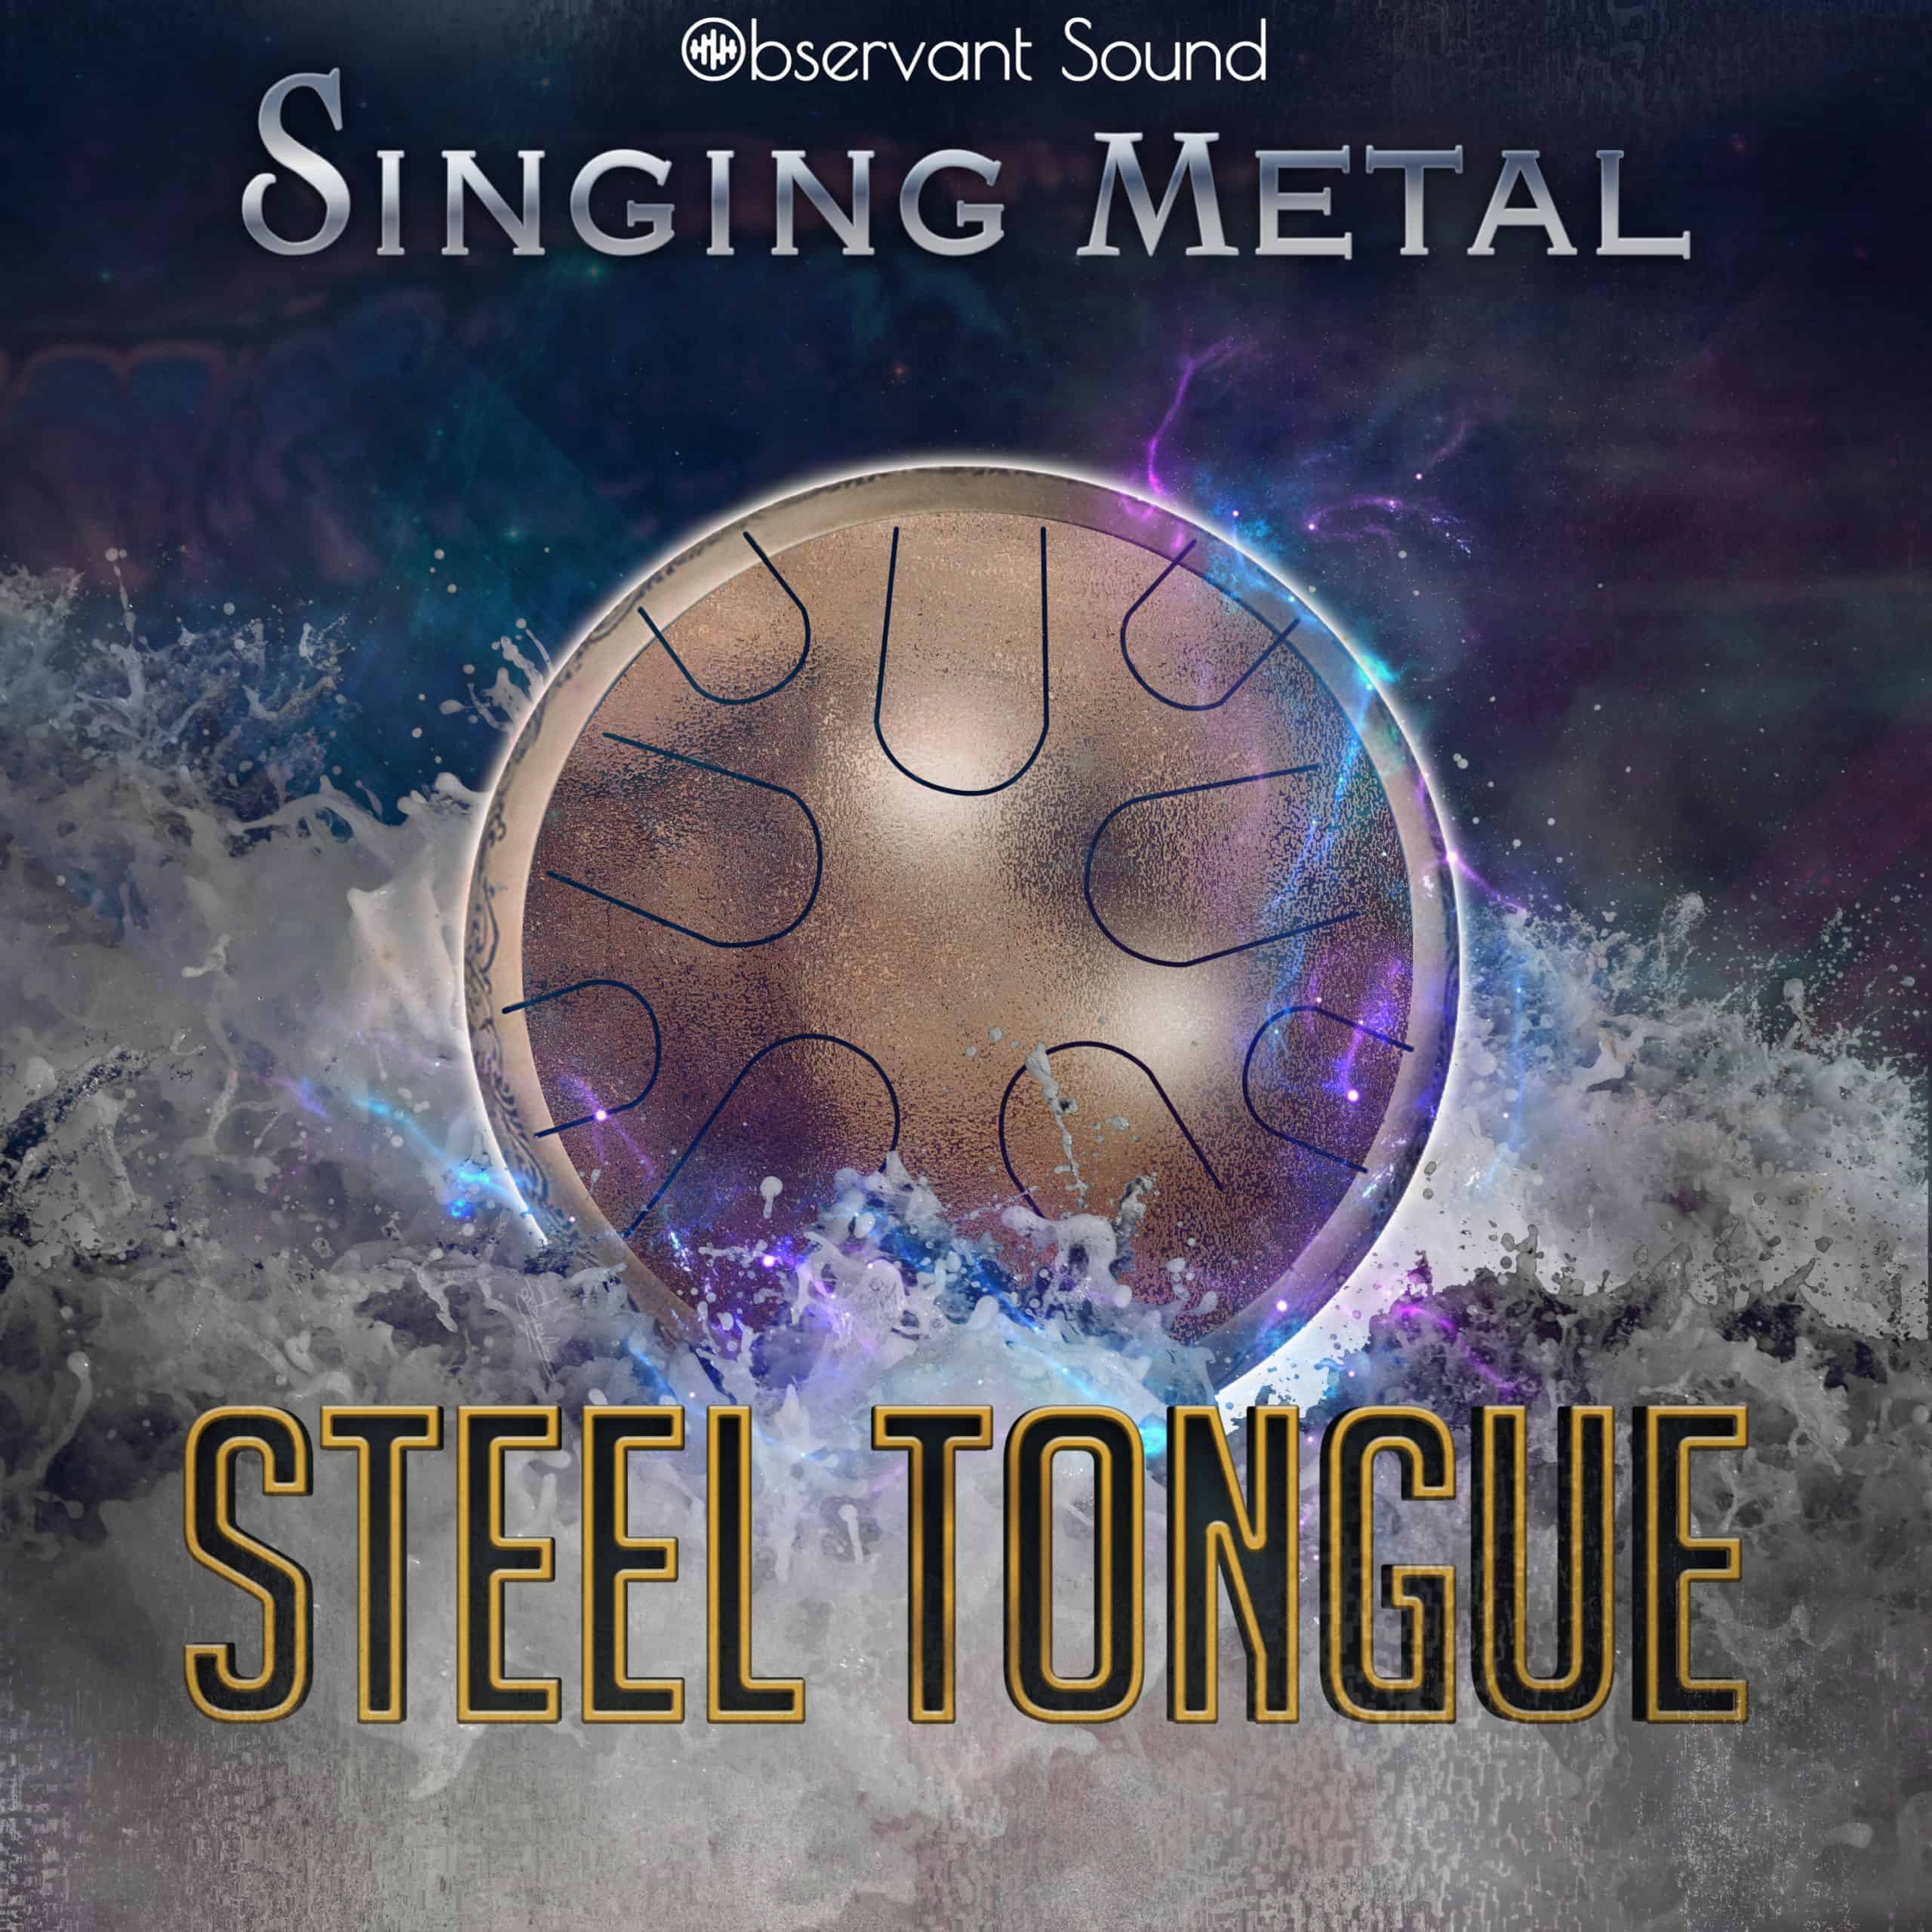 Steel Tongue by Observant Sound